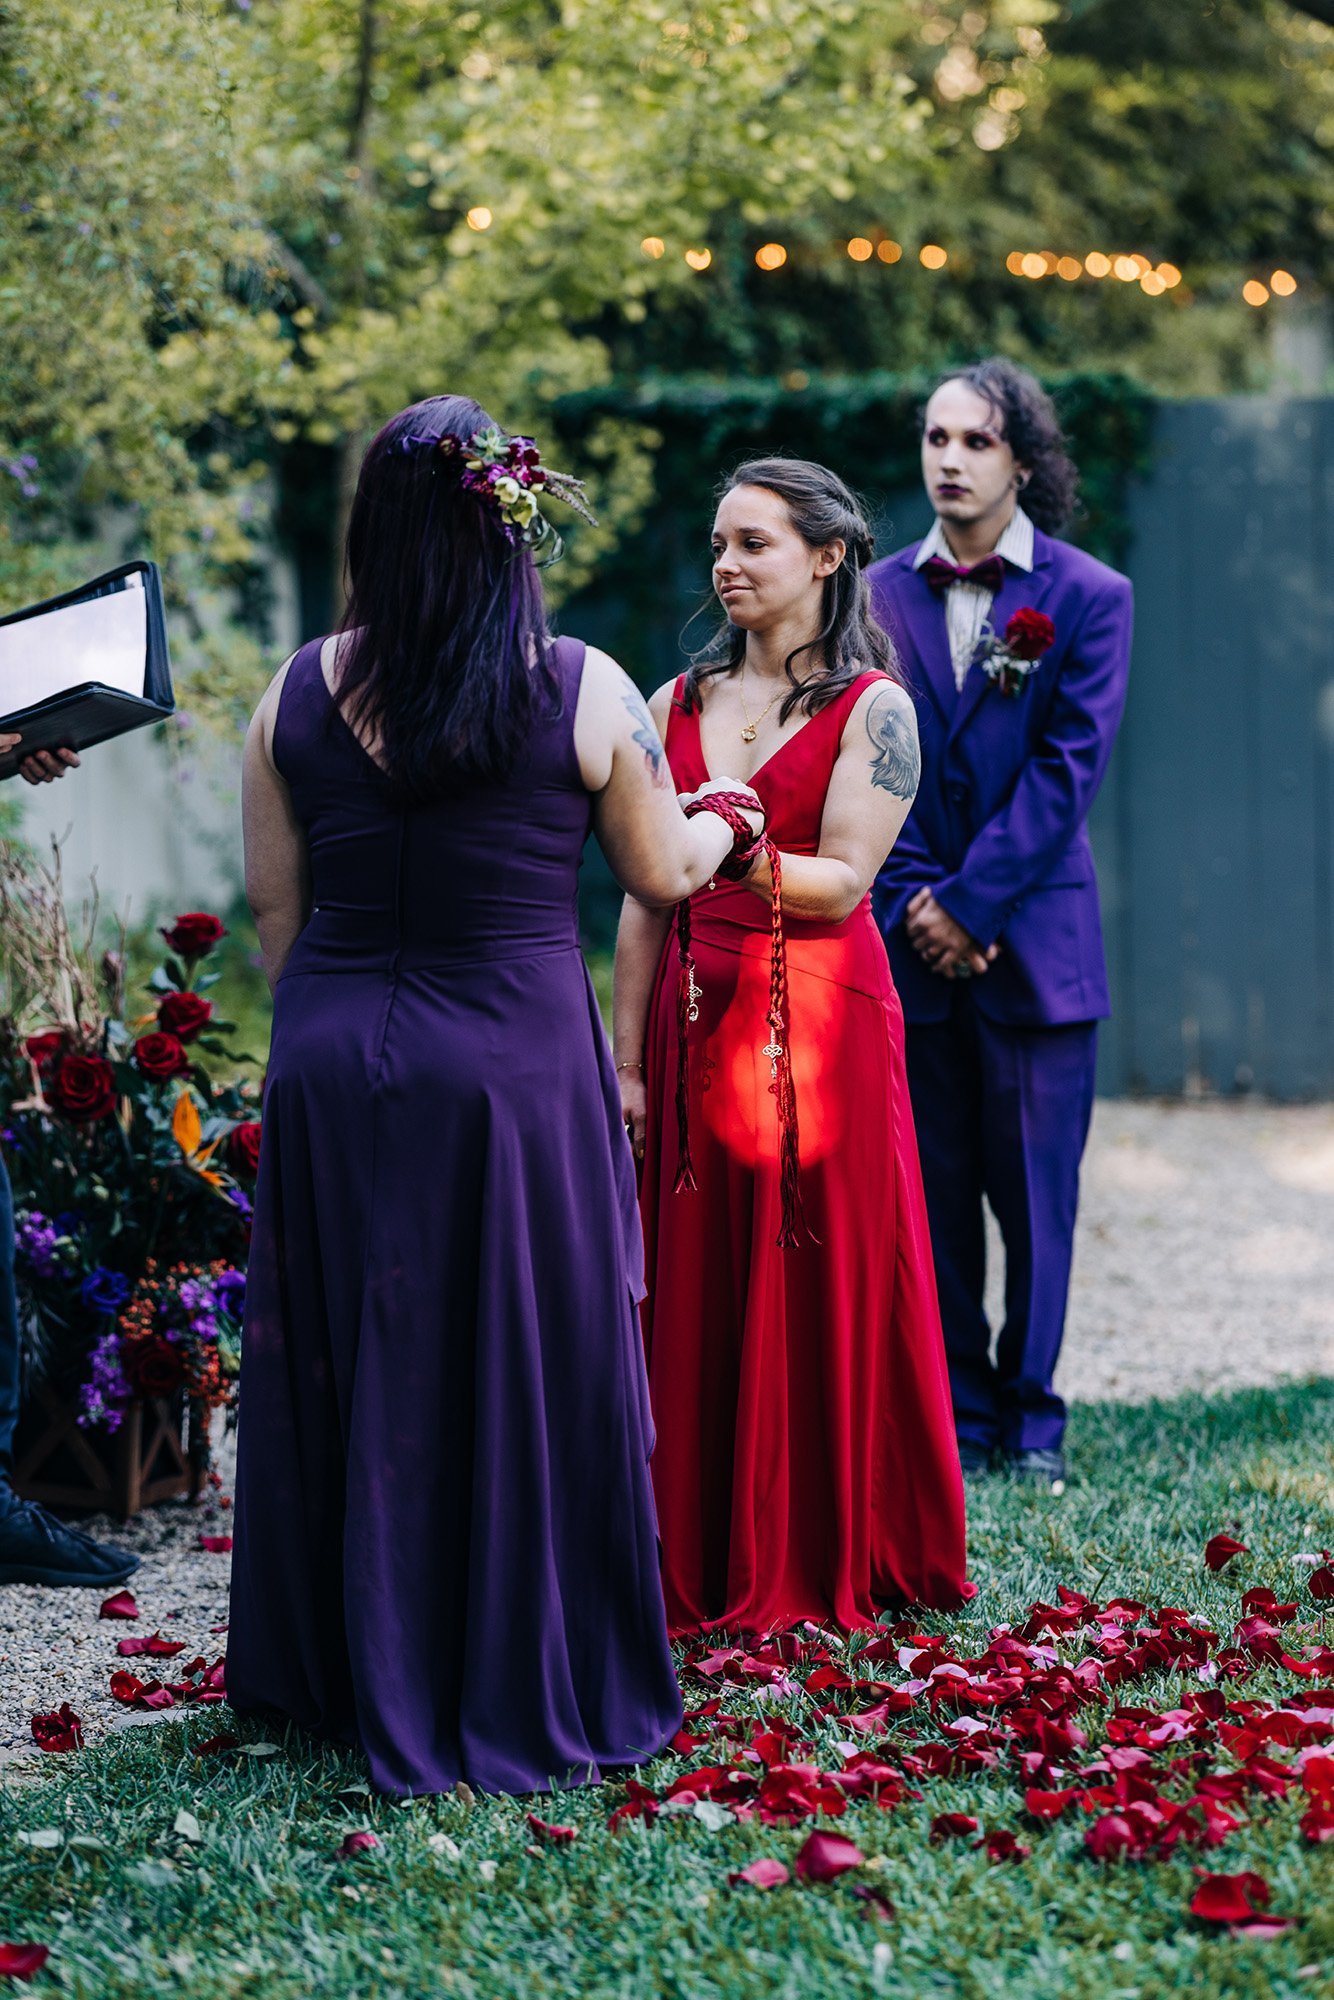 Heather and Veronica, dressed in purple and red dresses, share their wedding vows during this handfasting ceremony.